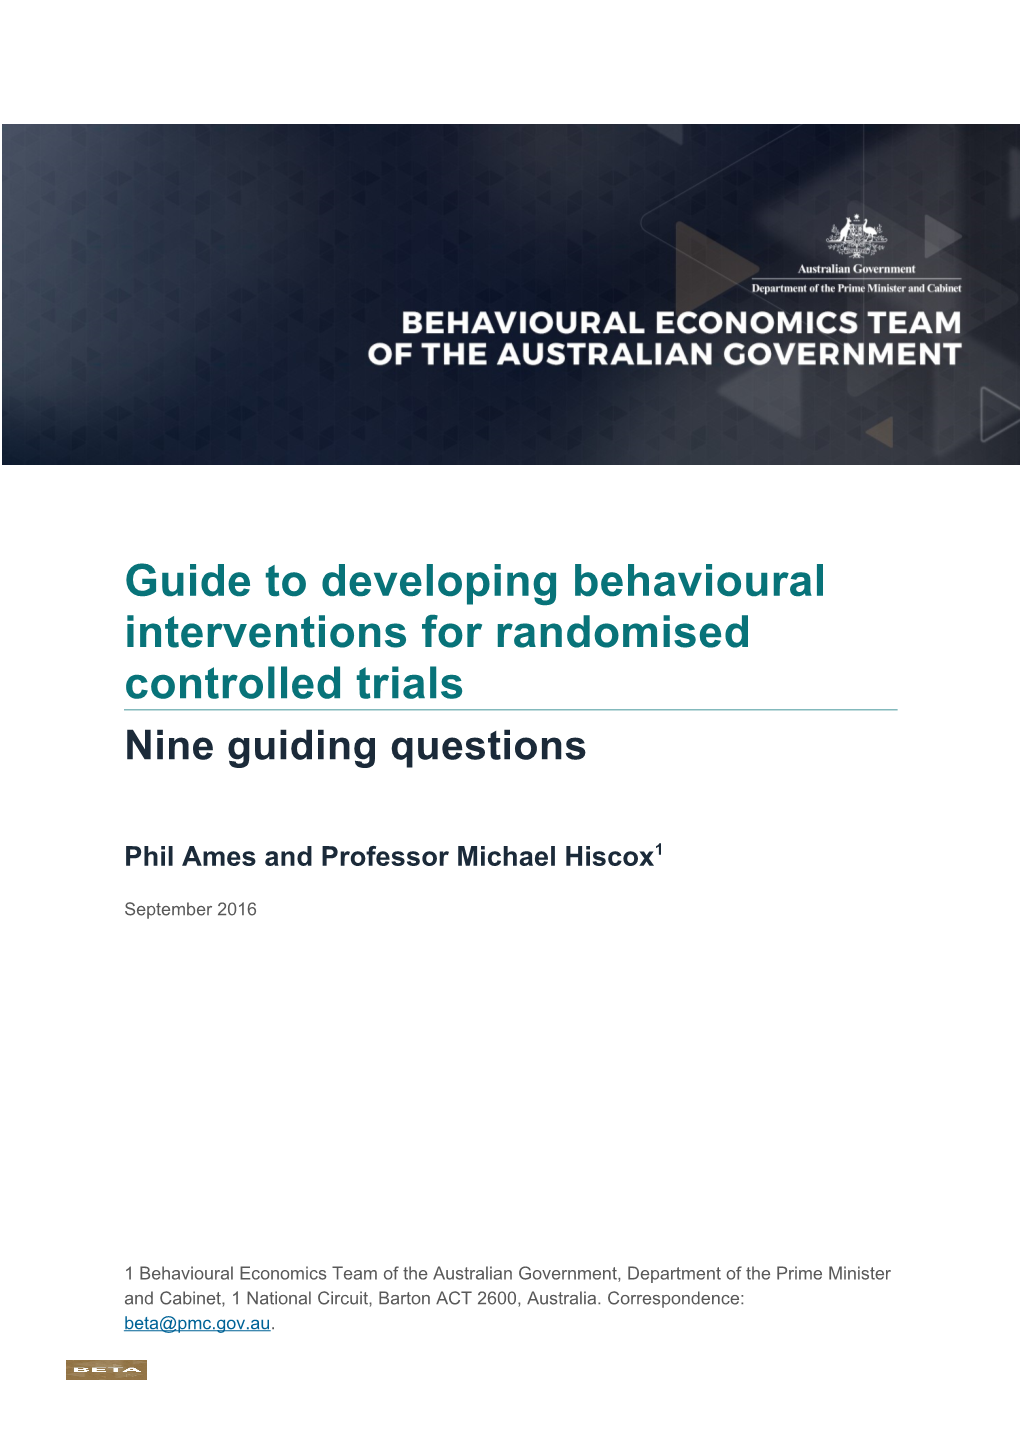 Guide to Developing Behavioural Interventions for Randomised Controlled Trials